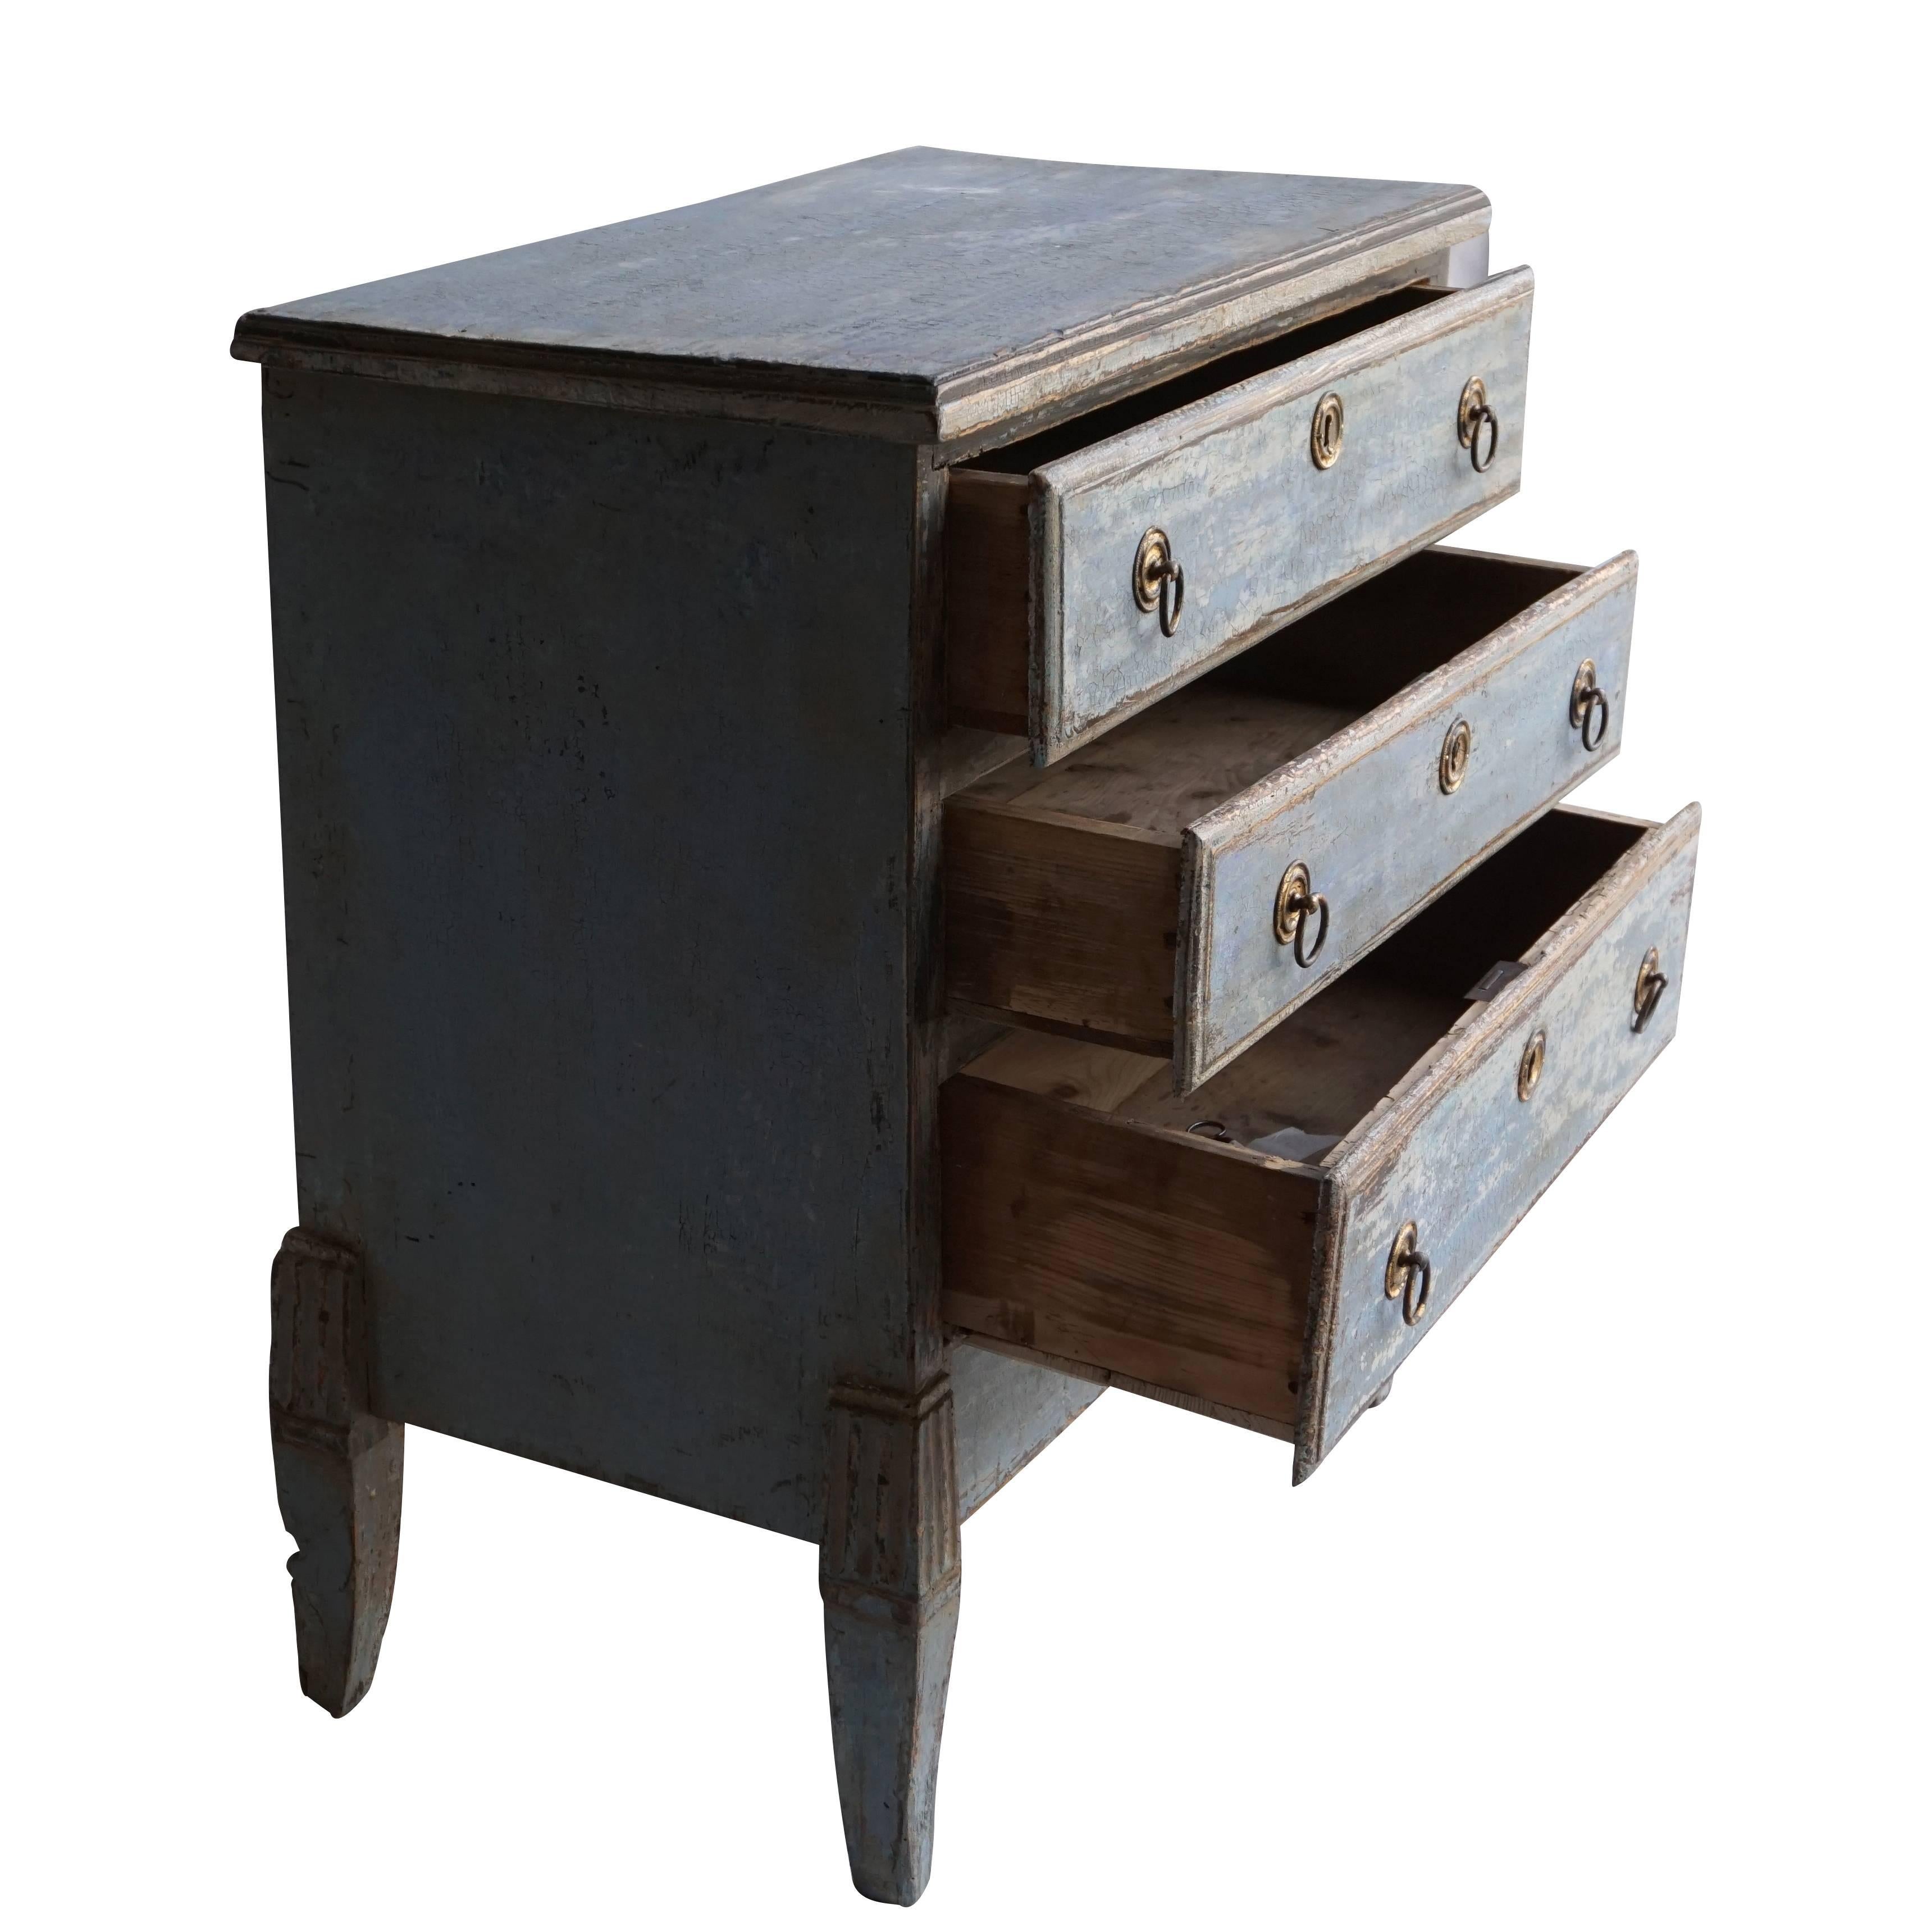 Swedish three-drawer dresser with original hardware and lion brass hardware on the centre of the bottom, circa 1780. The legs are tapered and the drawer dresser has the original blue grey finish. Pinewood, antique patina. Prov. Sweden, Scandinavia